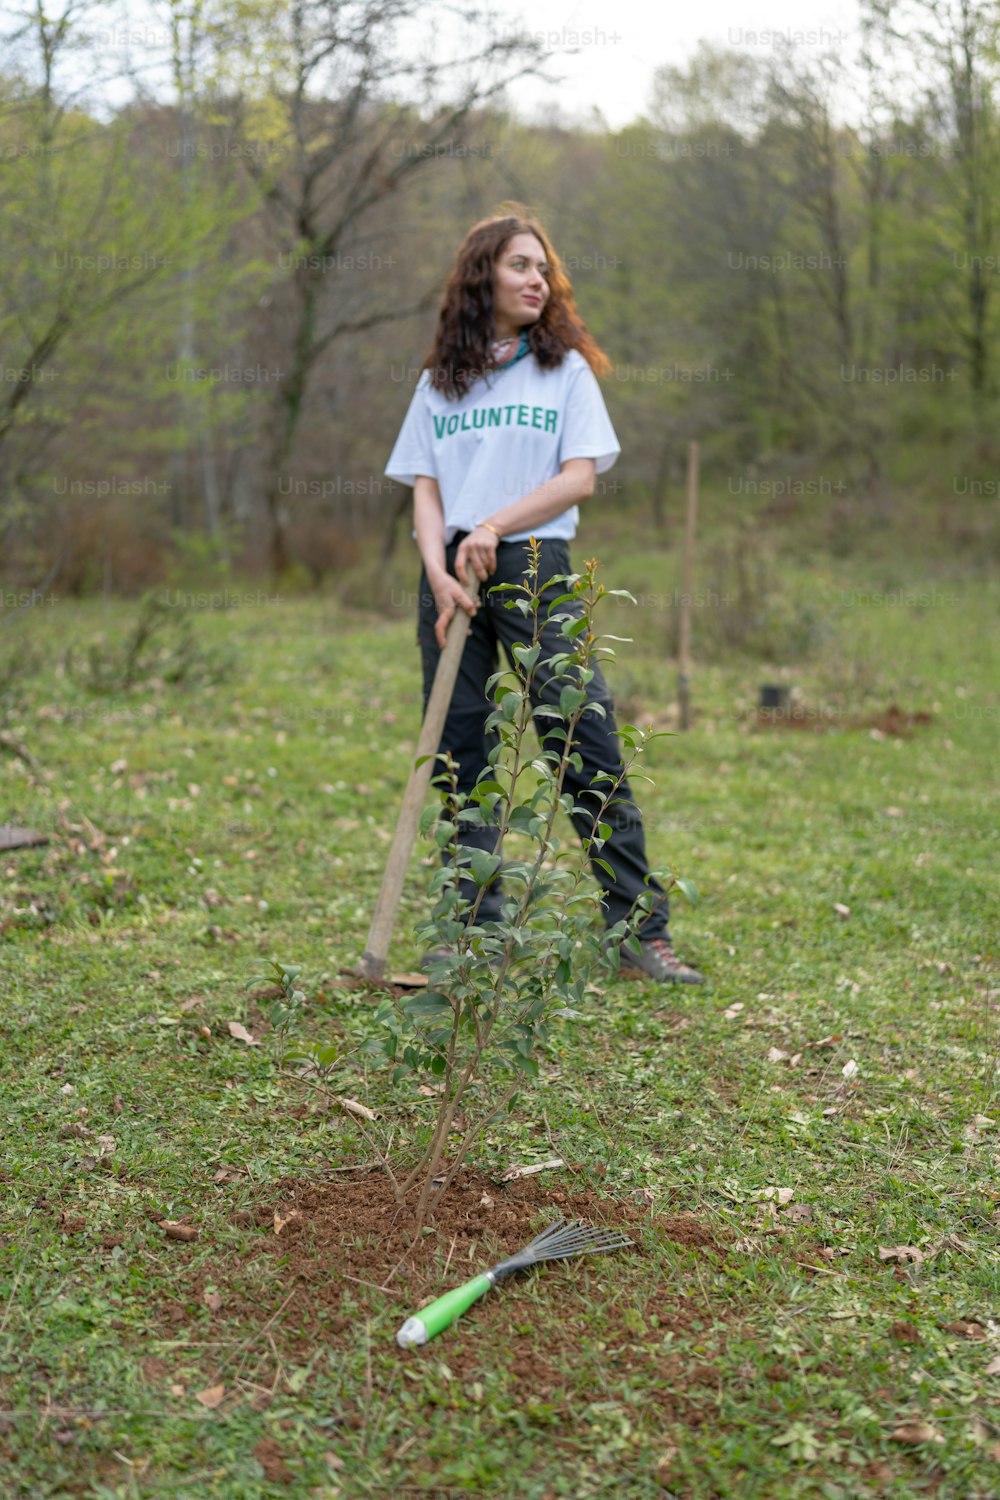 a woman is holding a shovel and digging a tree